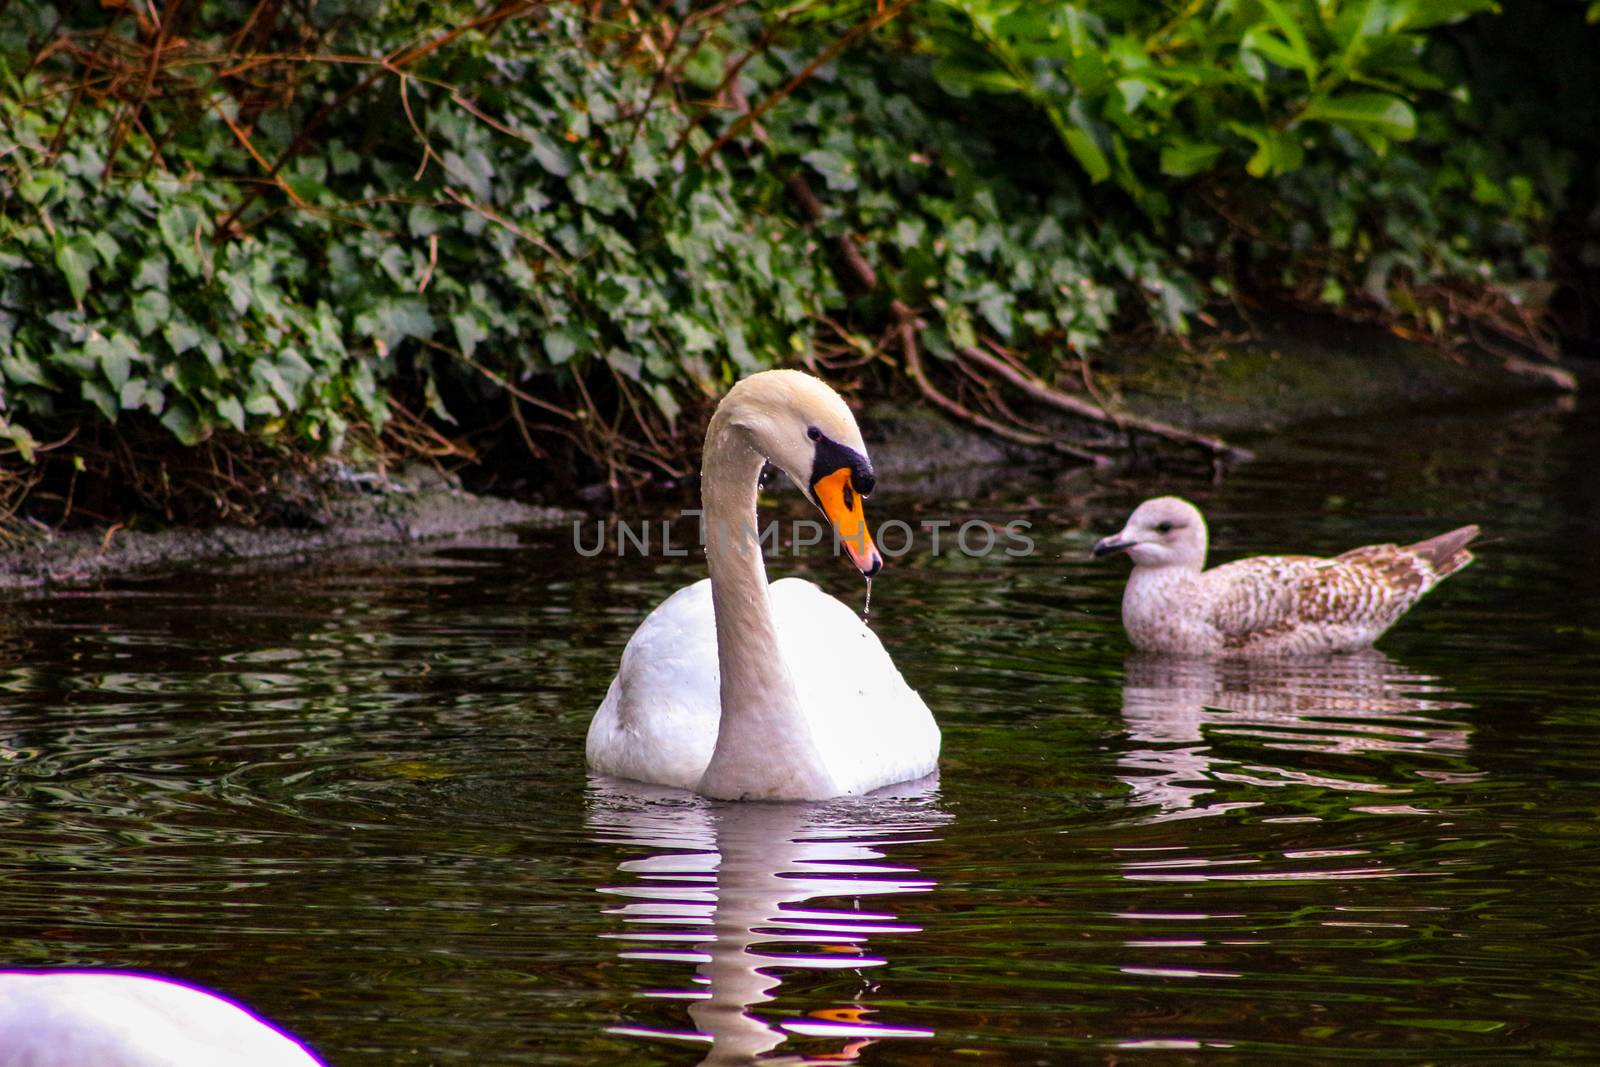 Mute swan cygnets, Cygnus olor, watched over by pen and cob, swimming in Grand Canal, Dublin, Ireland. Four young fluffy baby swans with soft down in water beside mother and father by mynewturtle1